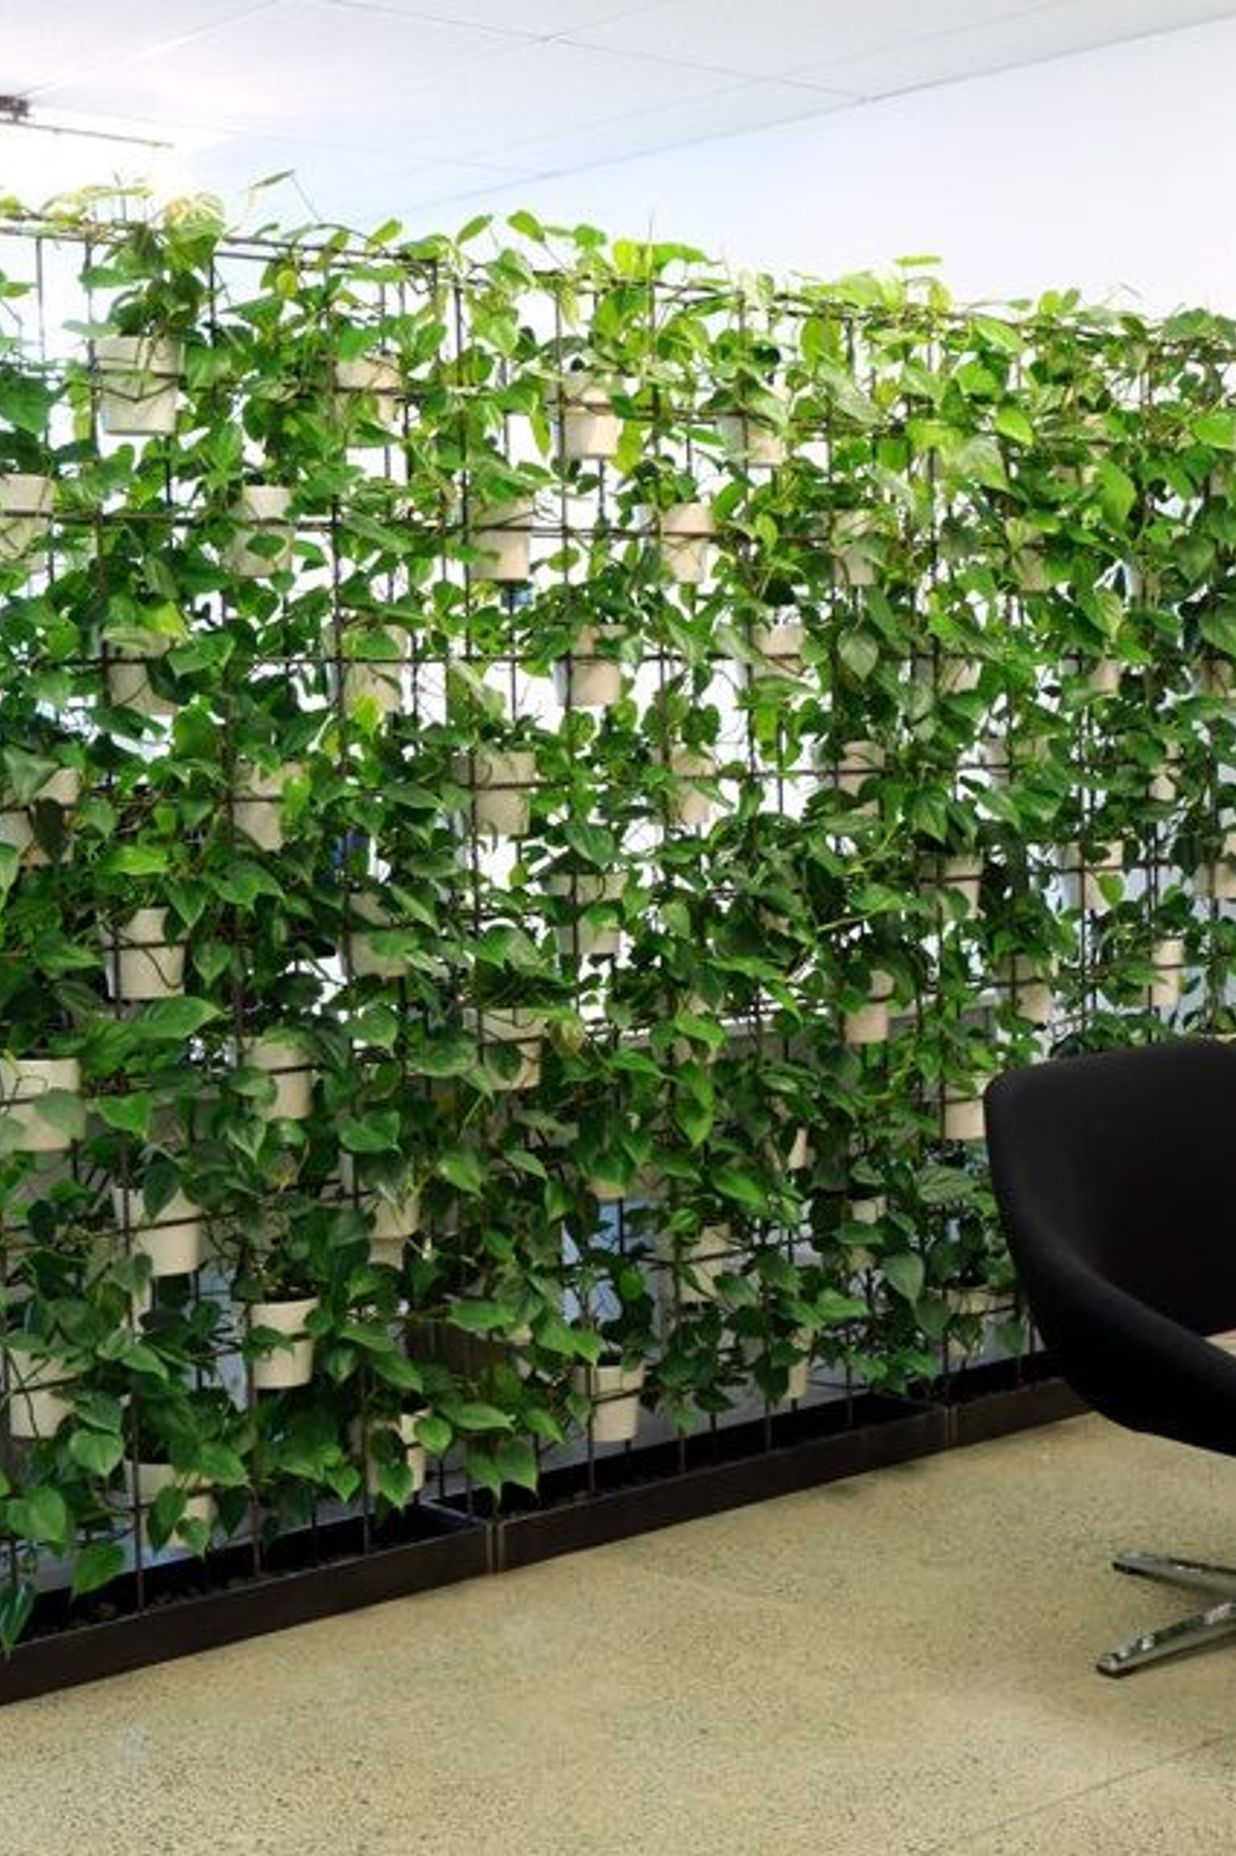 Green walls are increasingly popular as the biophilic aesthetic makes people feel happier at work.